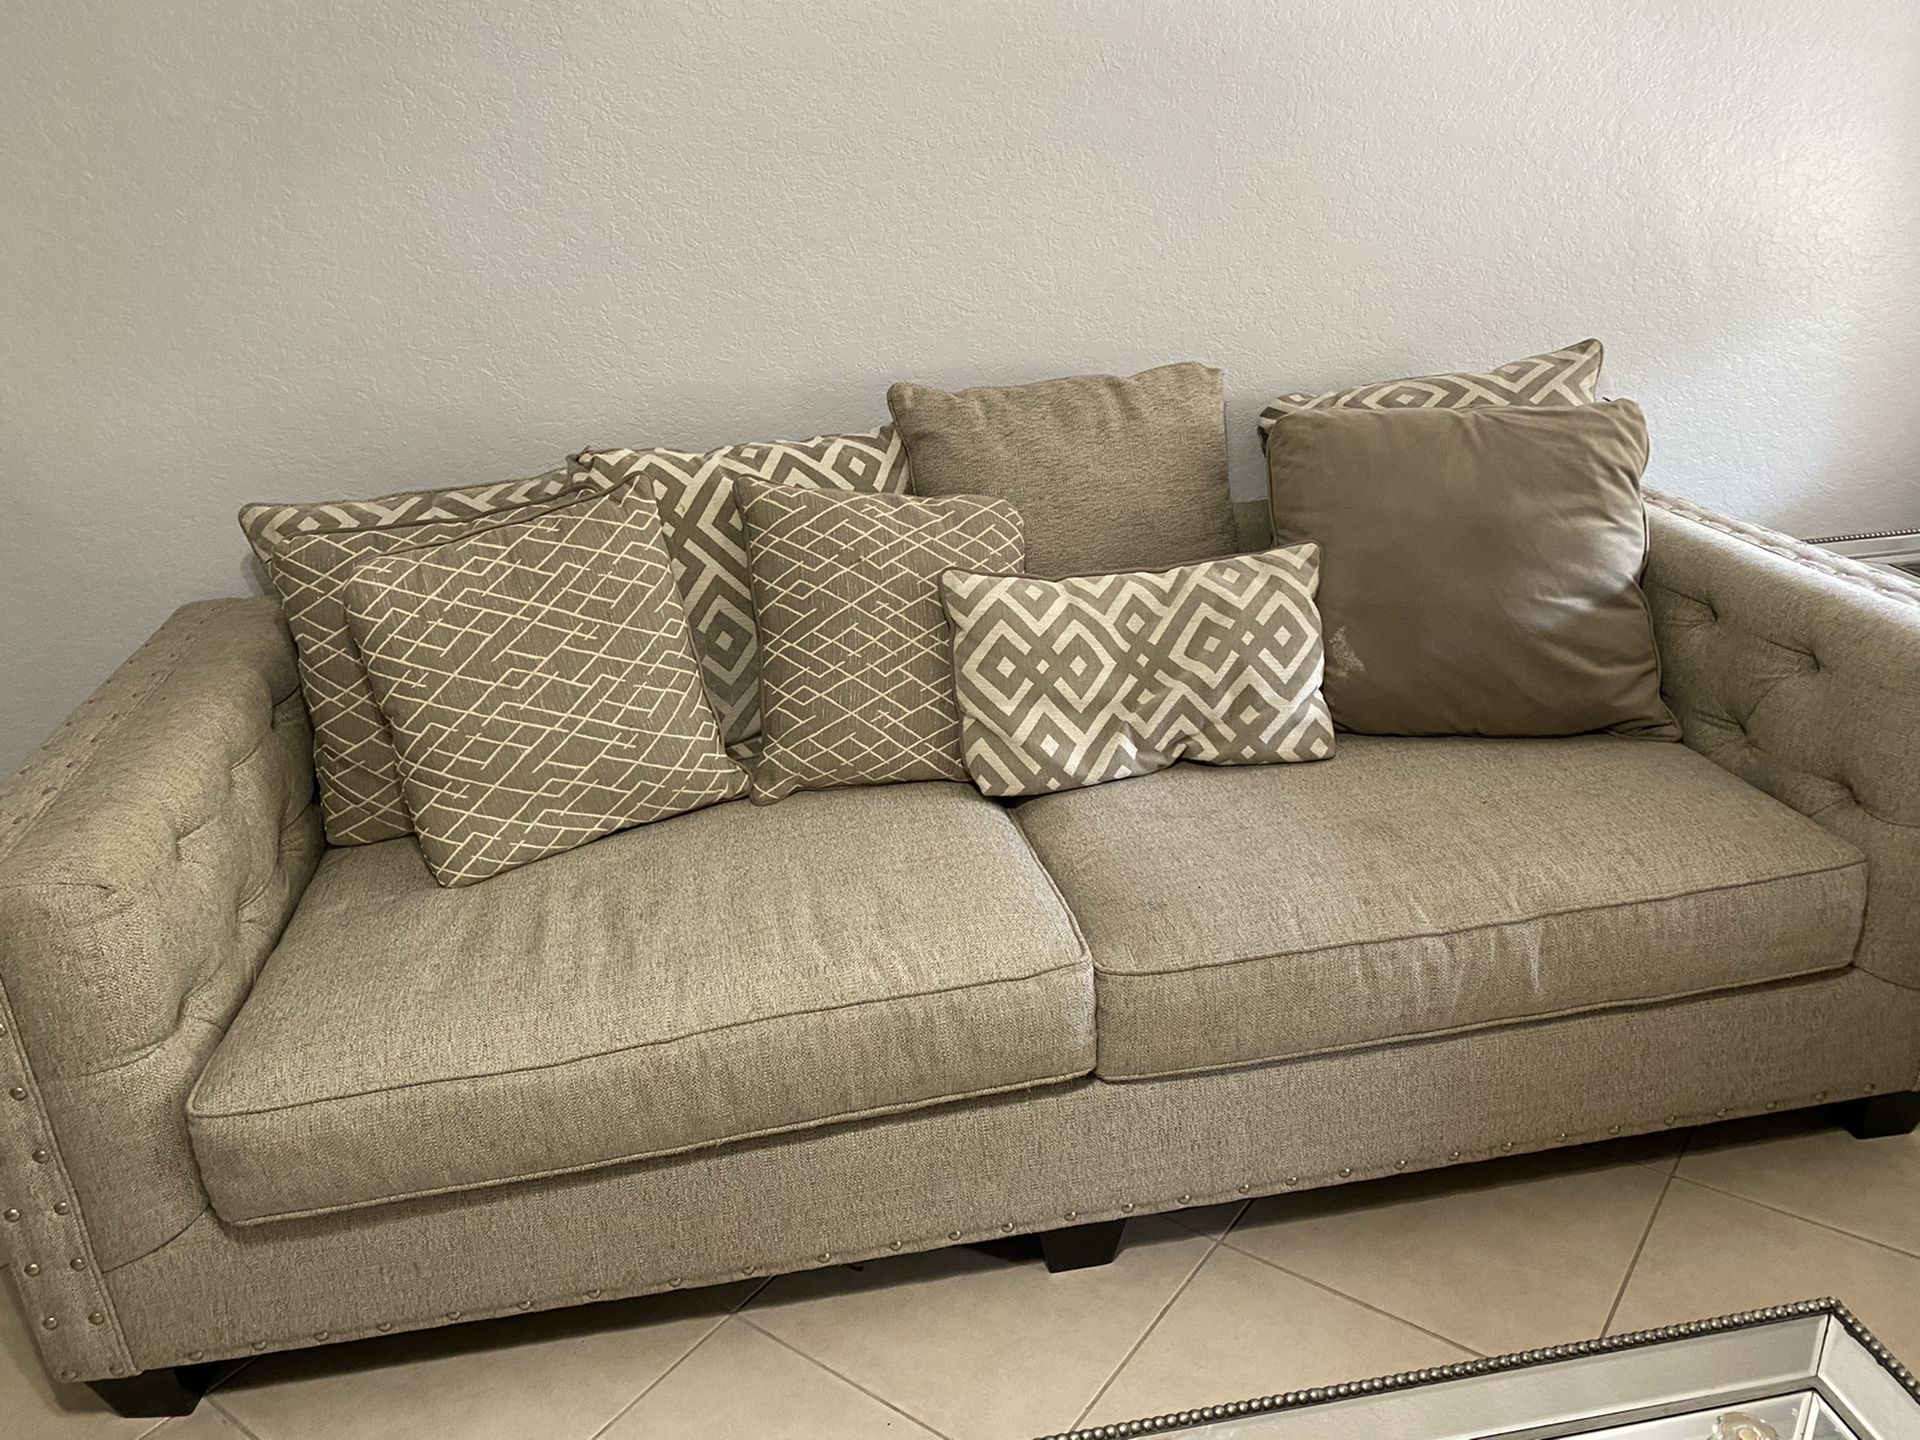 Beige/grayish couch 40x96 inches